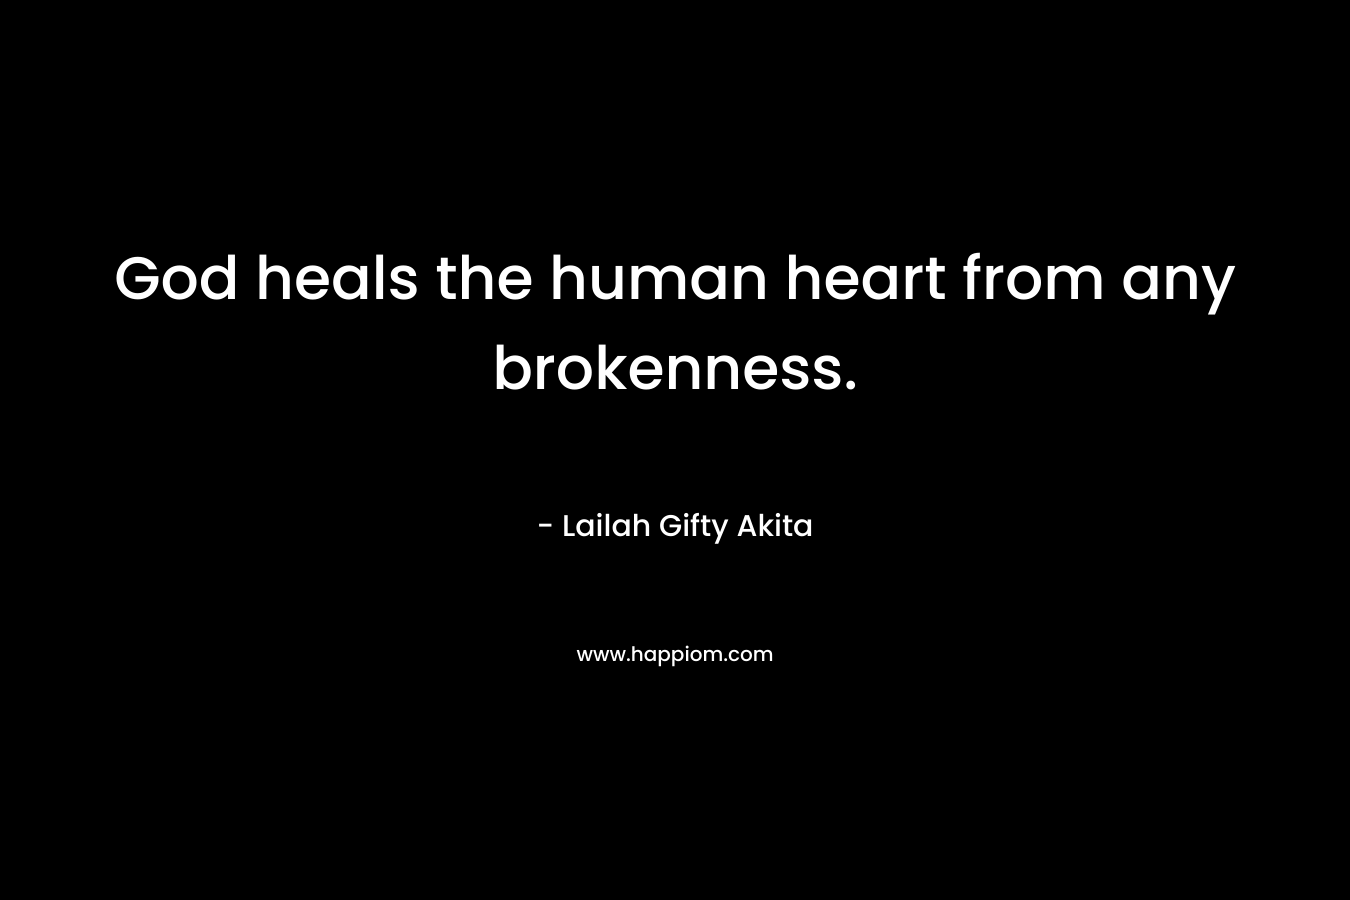 God heals the human heart from any brokenness.